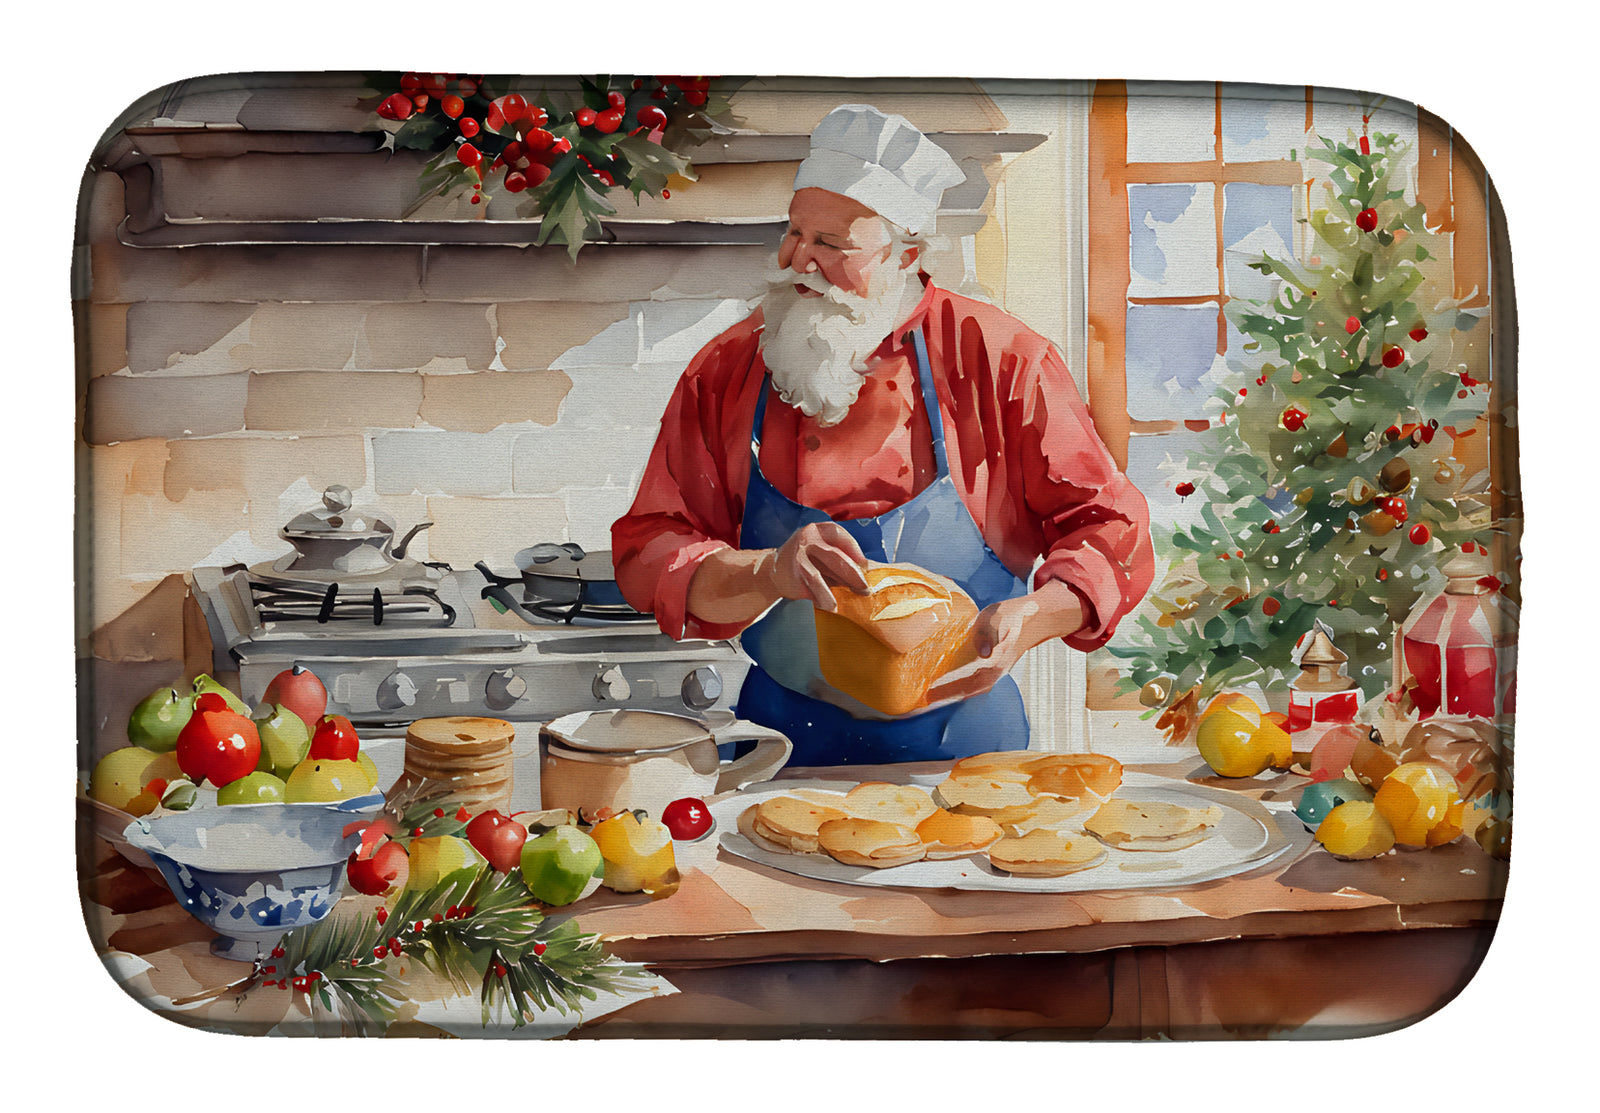 Buy this Cookies with Santa Claus Weihnachtsmann Dish Drying Mat